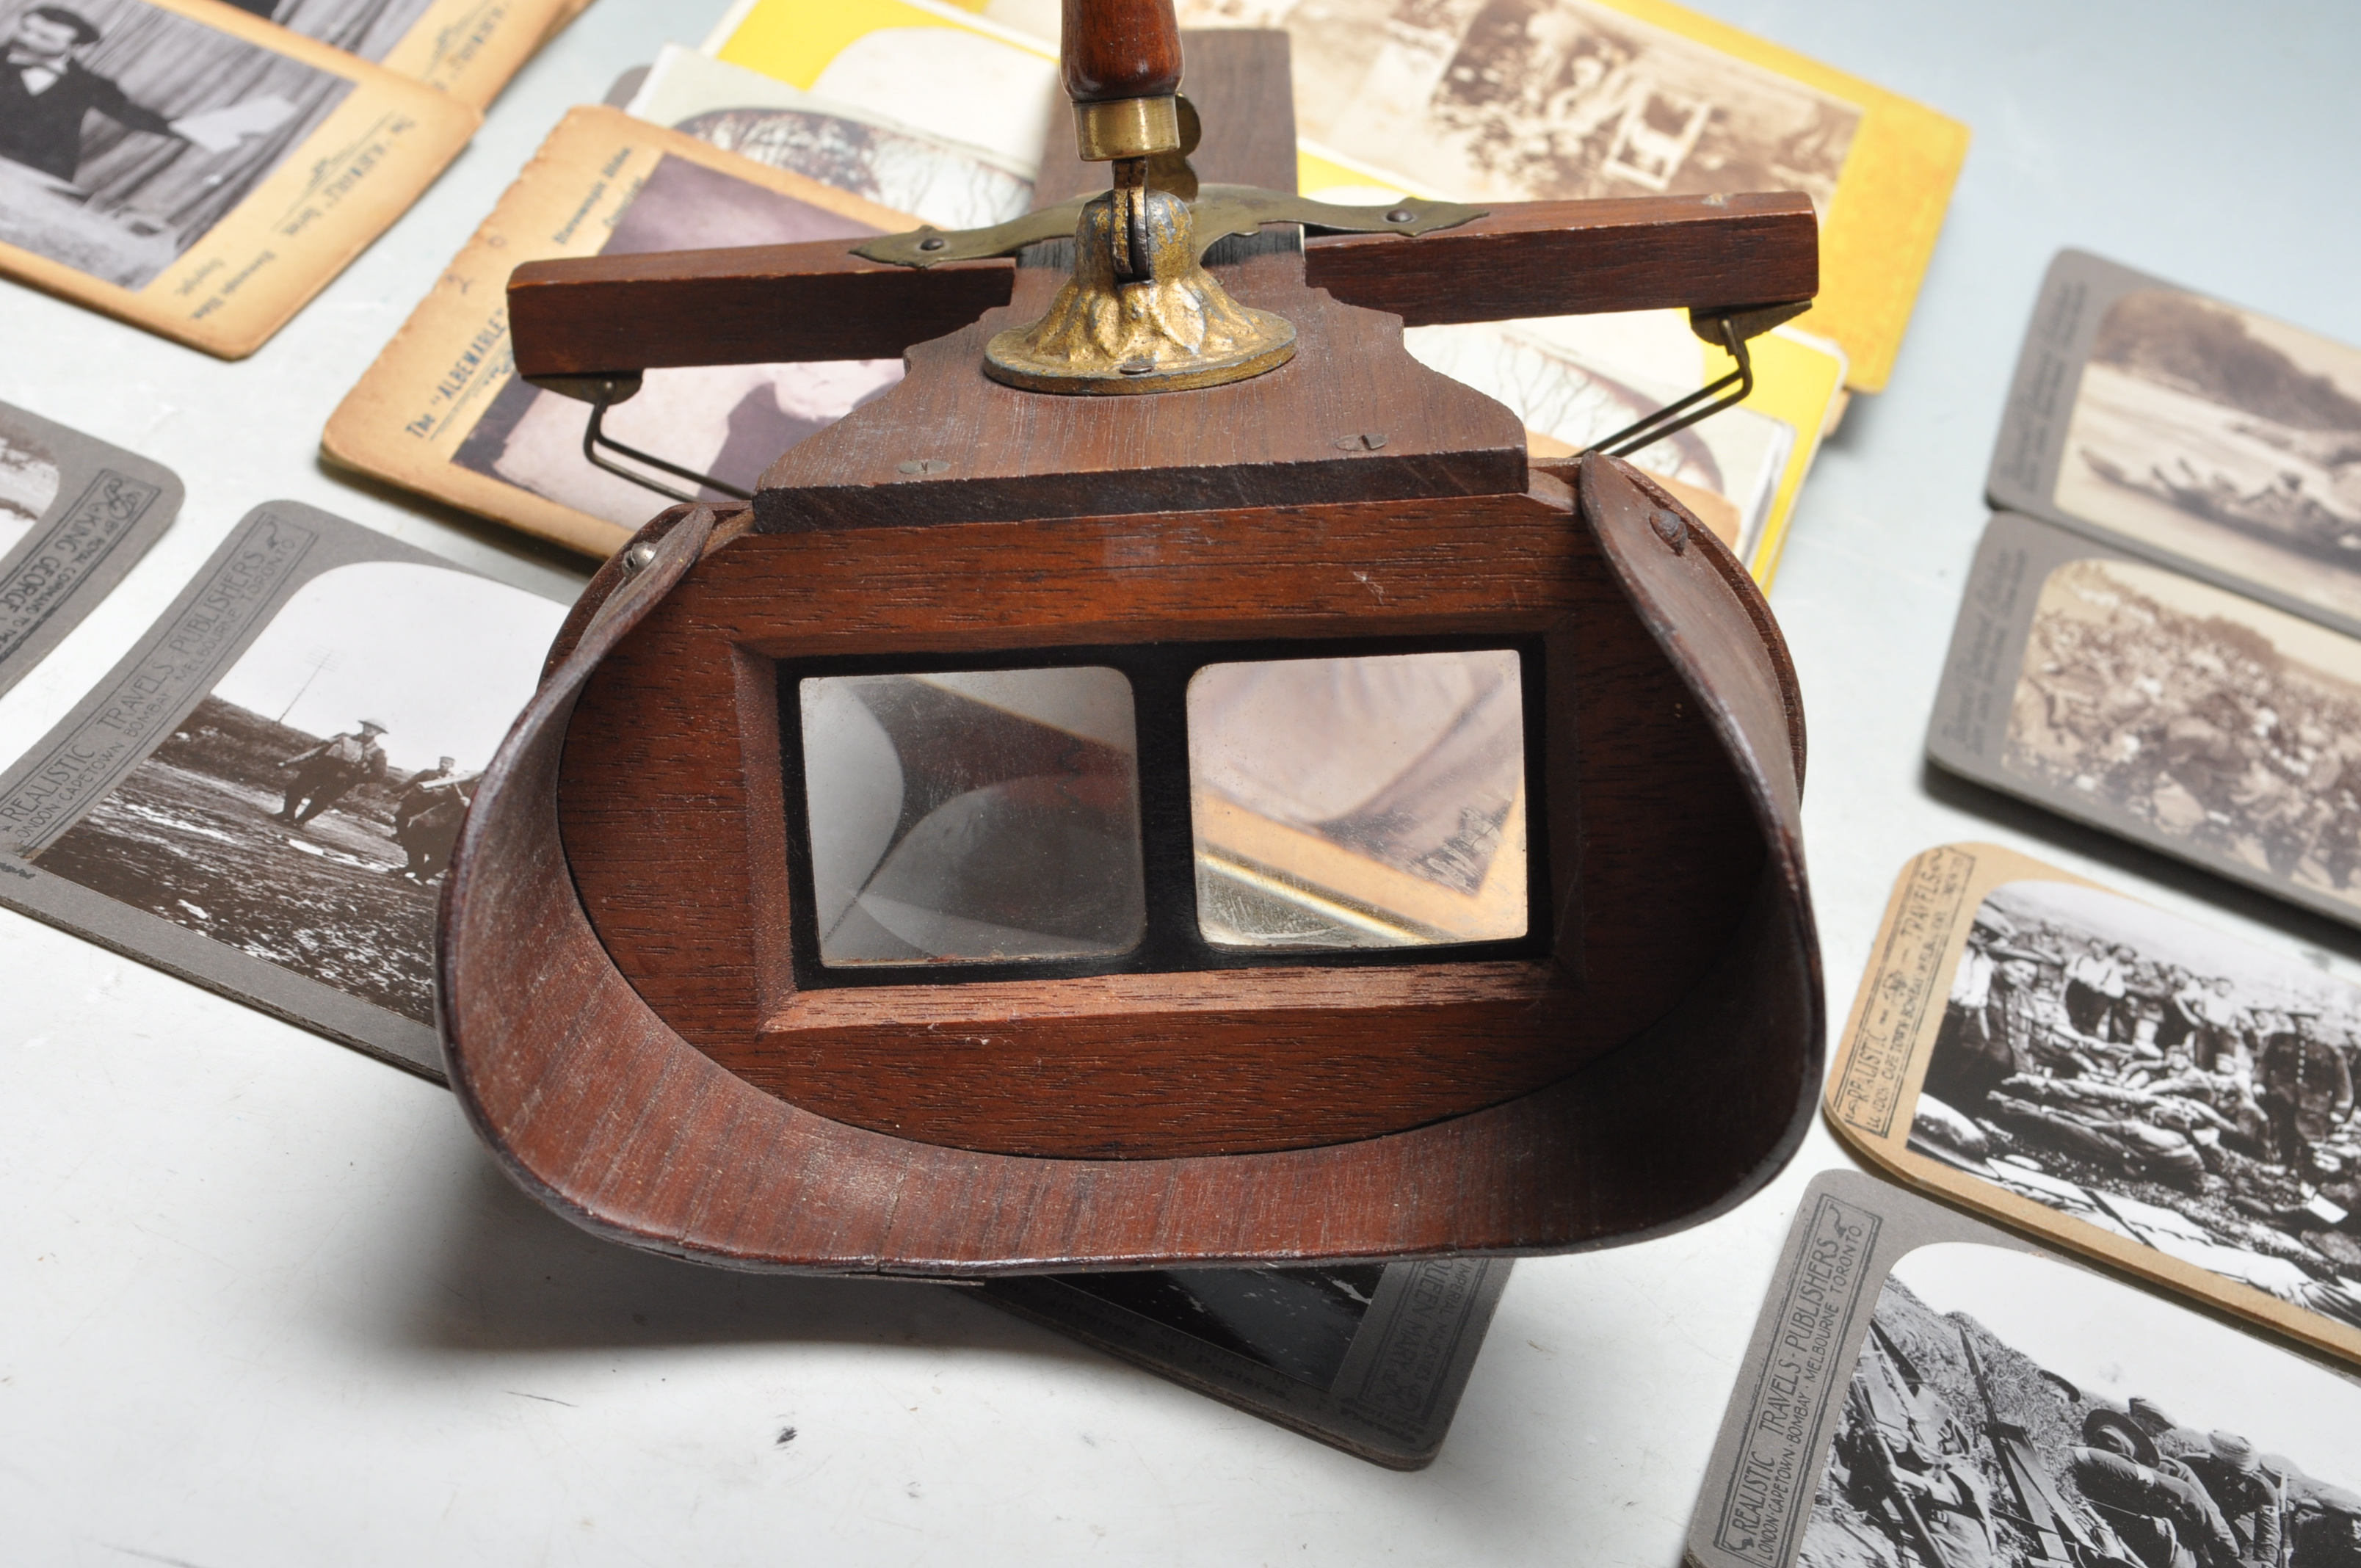 VICTORIAN / EDWARDIAN STEREOSCOPIC / STEREOSCOPE VIEWER & SLIDES - Image 3 of 11